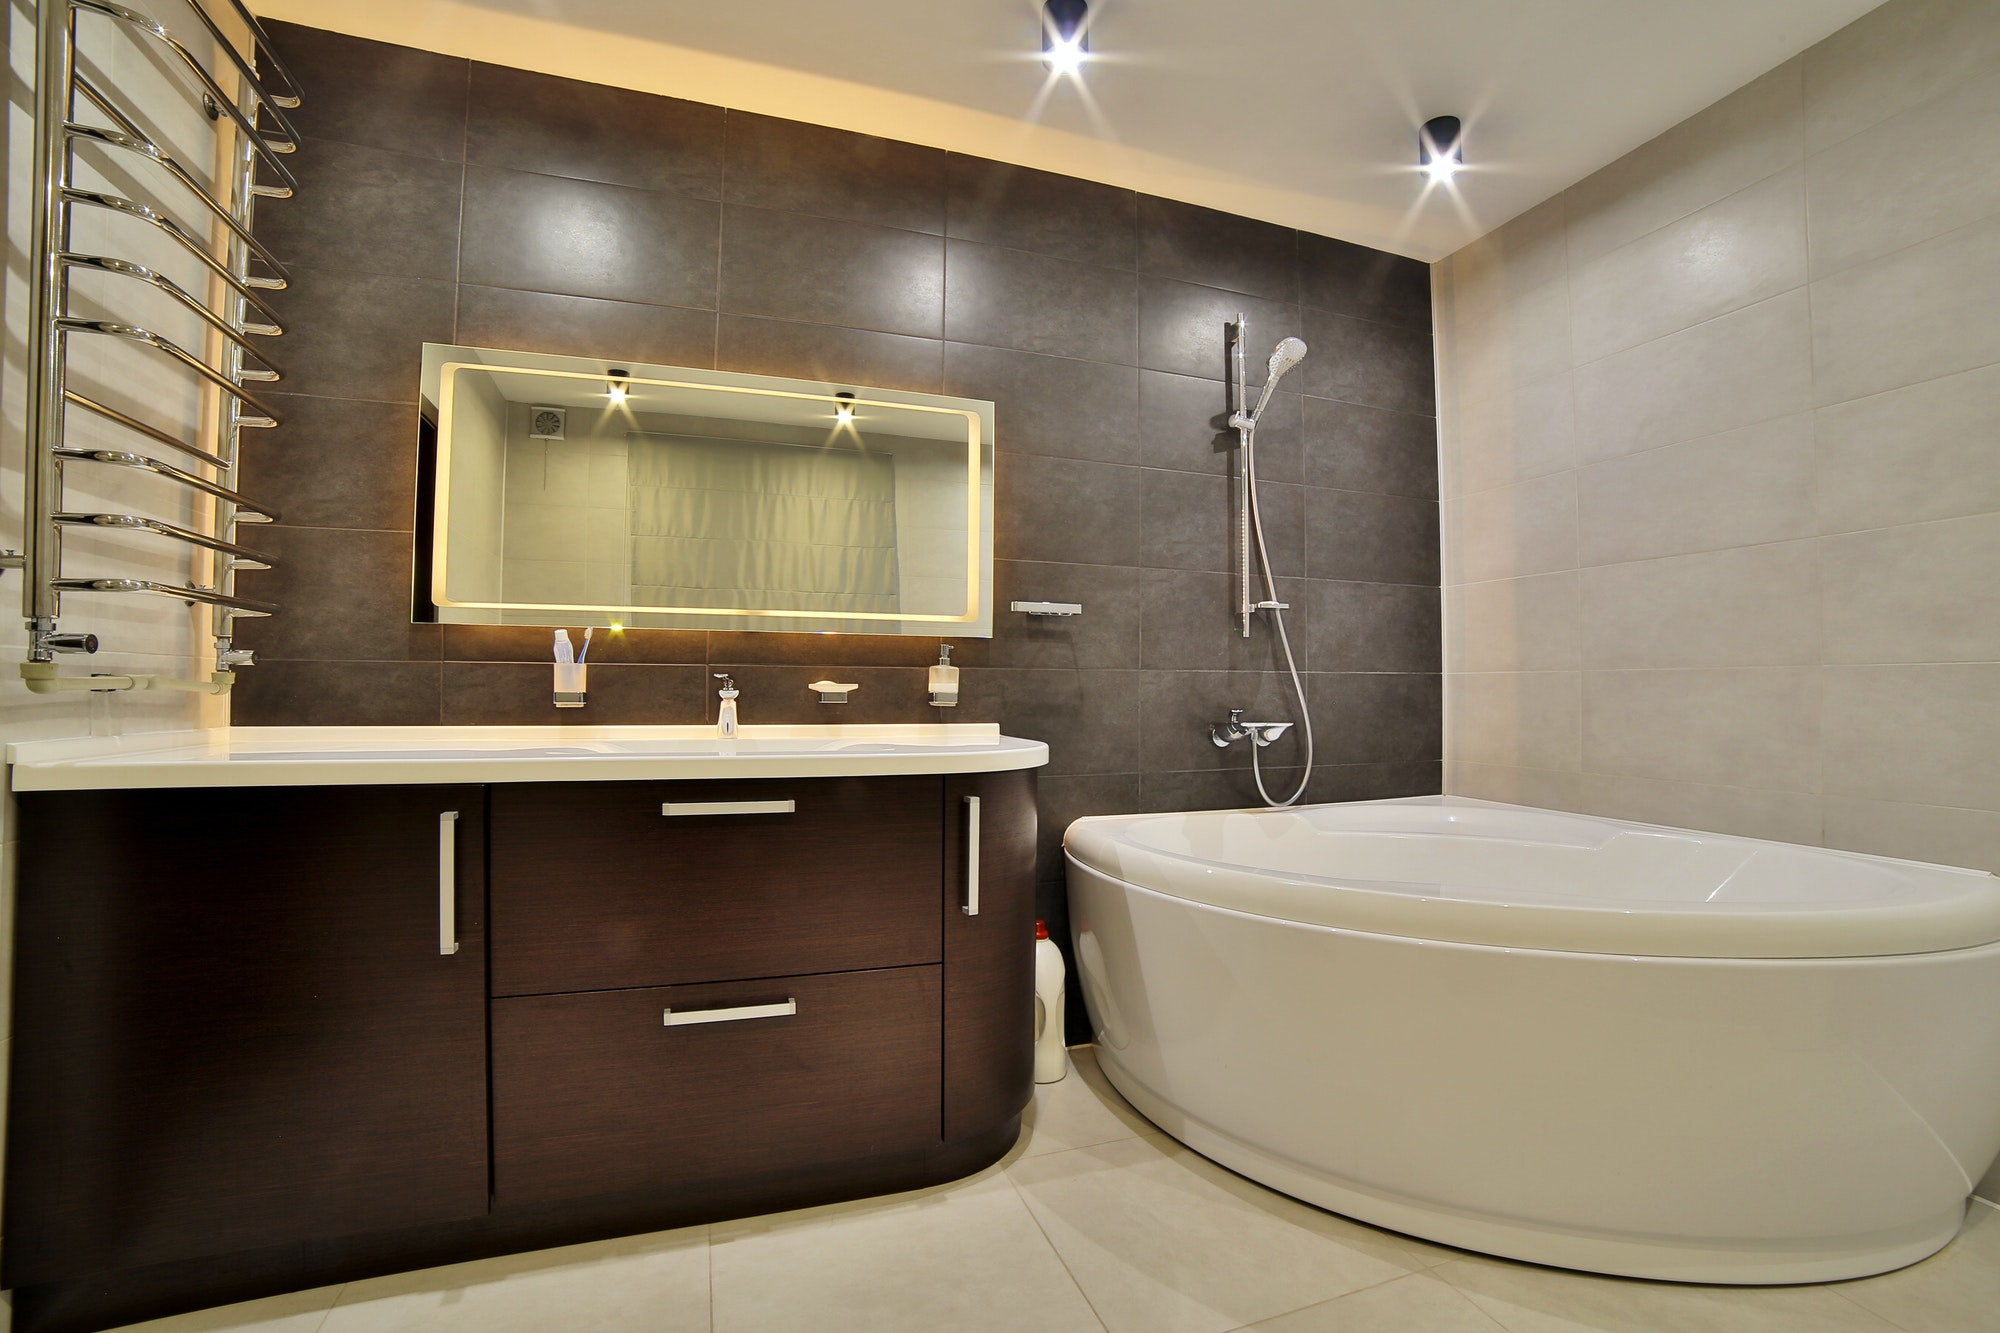 Luxury bathroom in the french style in the house. bathroom interior.